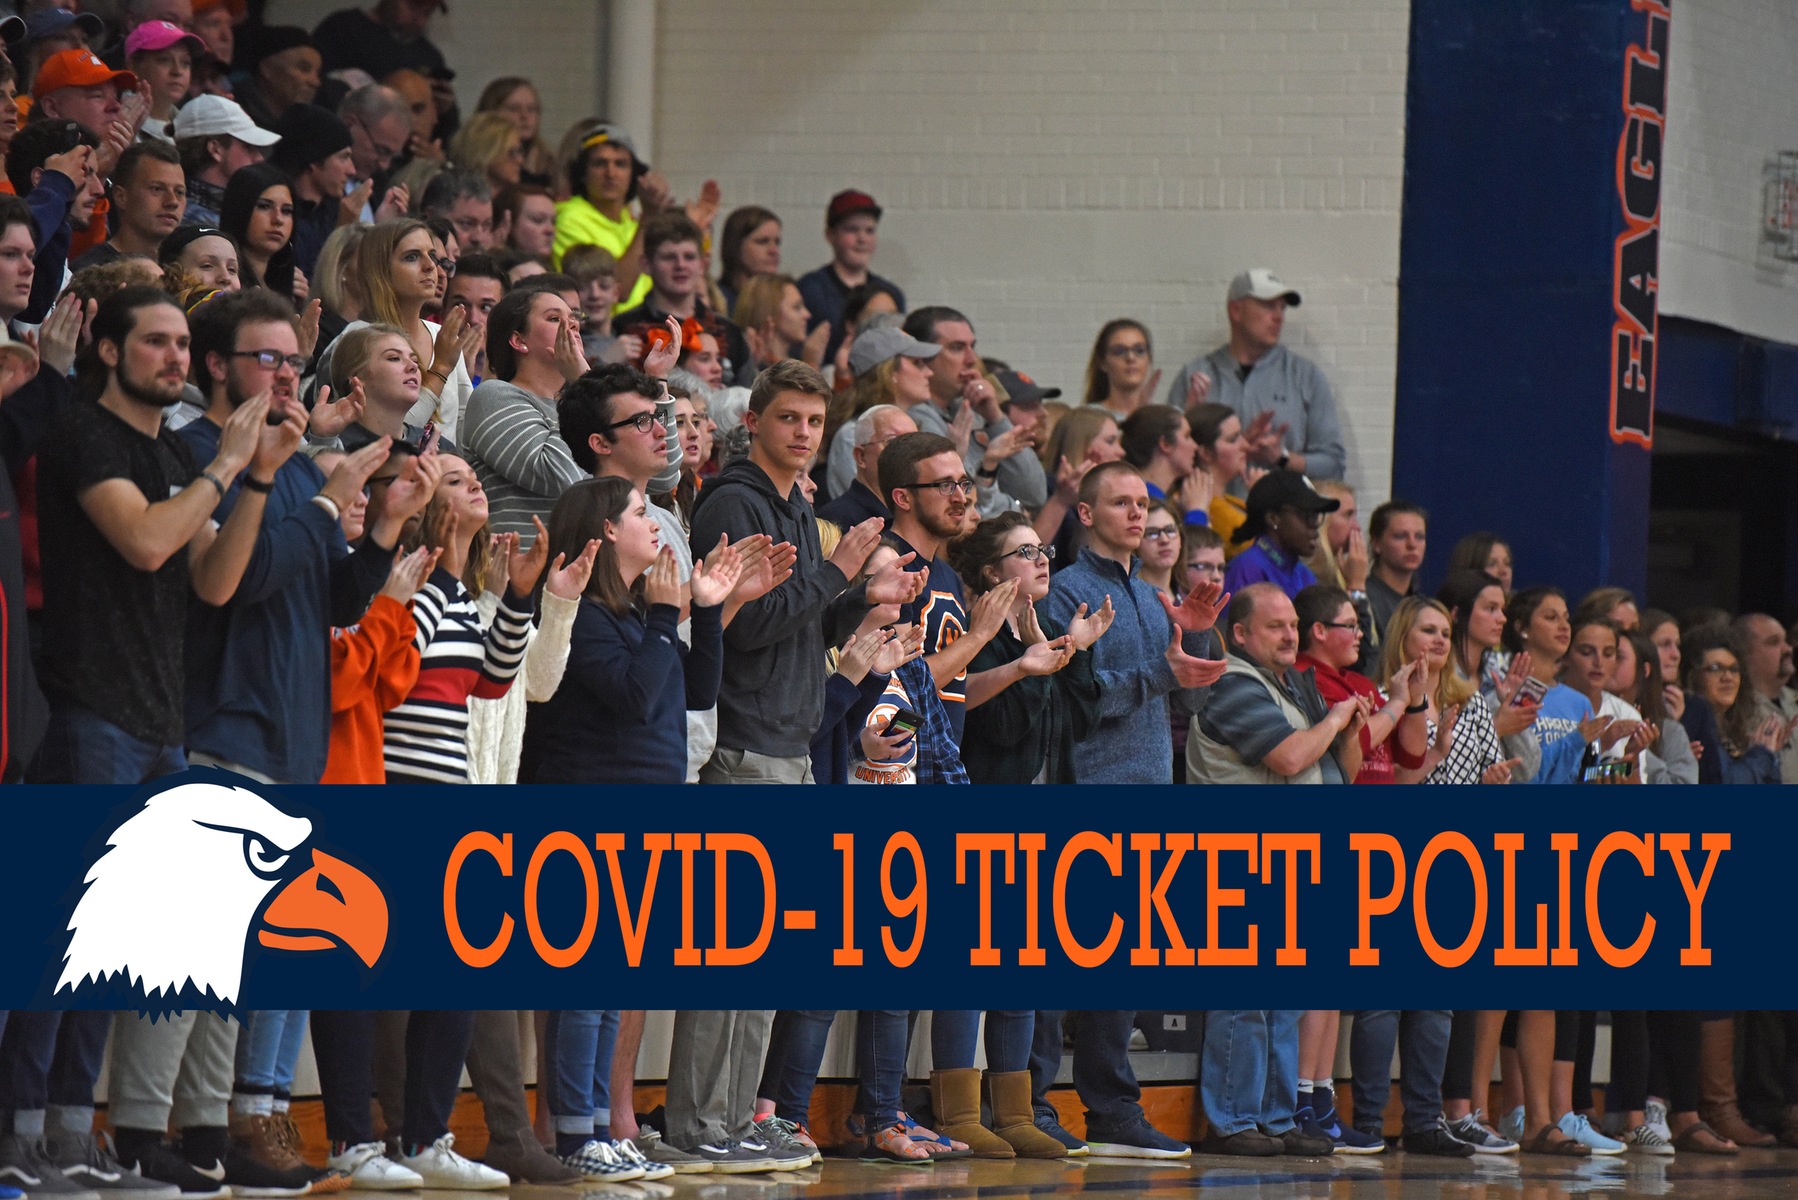 Carson-Newman announces attendance restrictions, ticket policies for hoops season